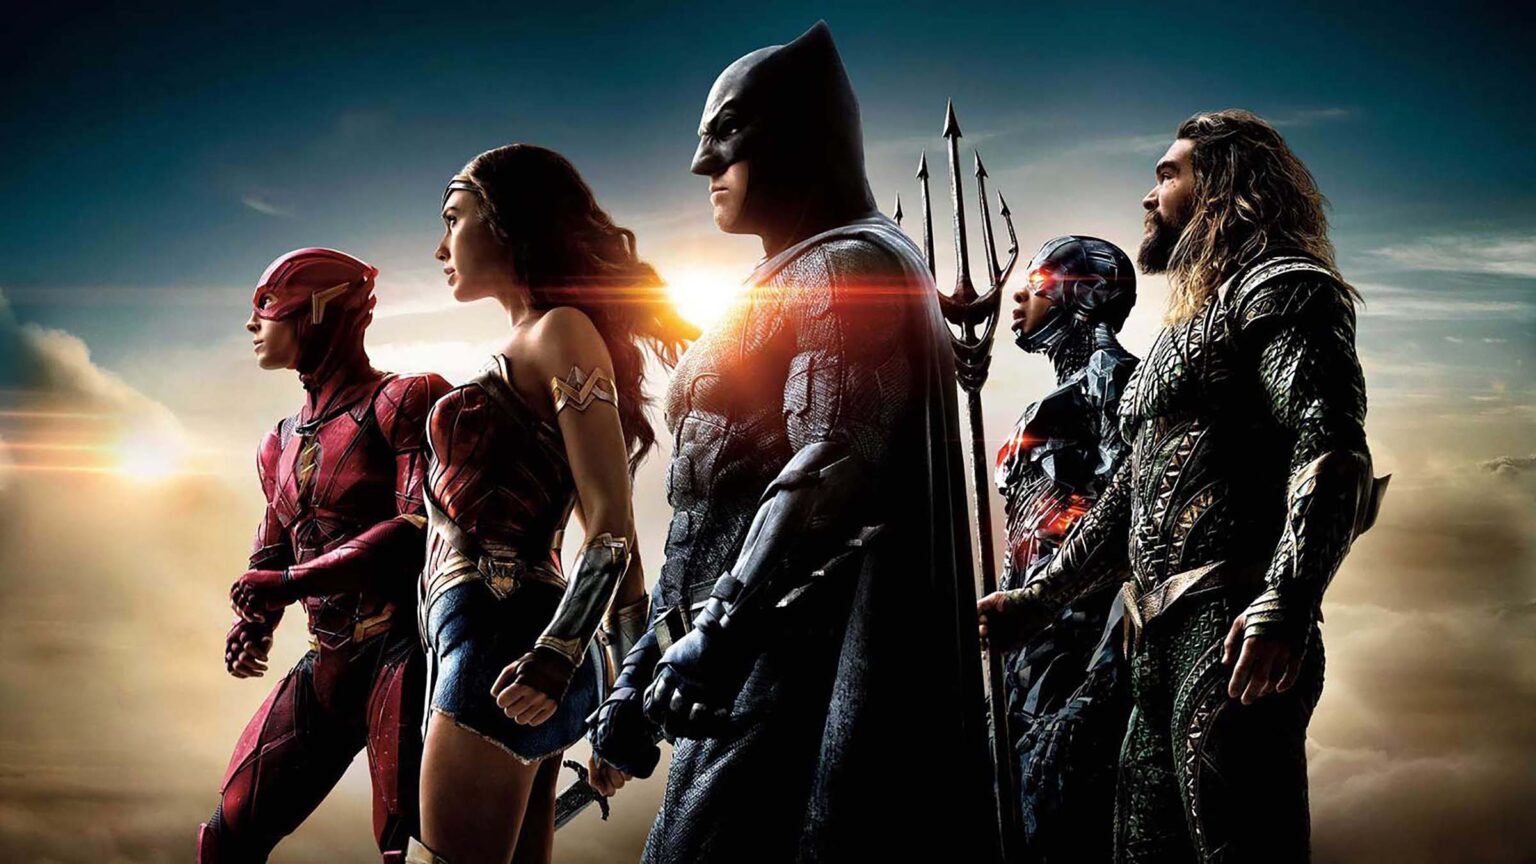 Now that Zack Snyder is under way producing his cut of 'Justice League', many are wondering if his cut can bring the DCEU back to life.